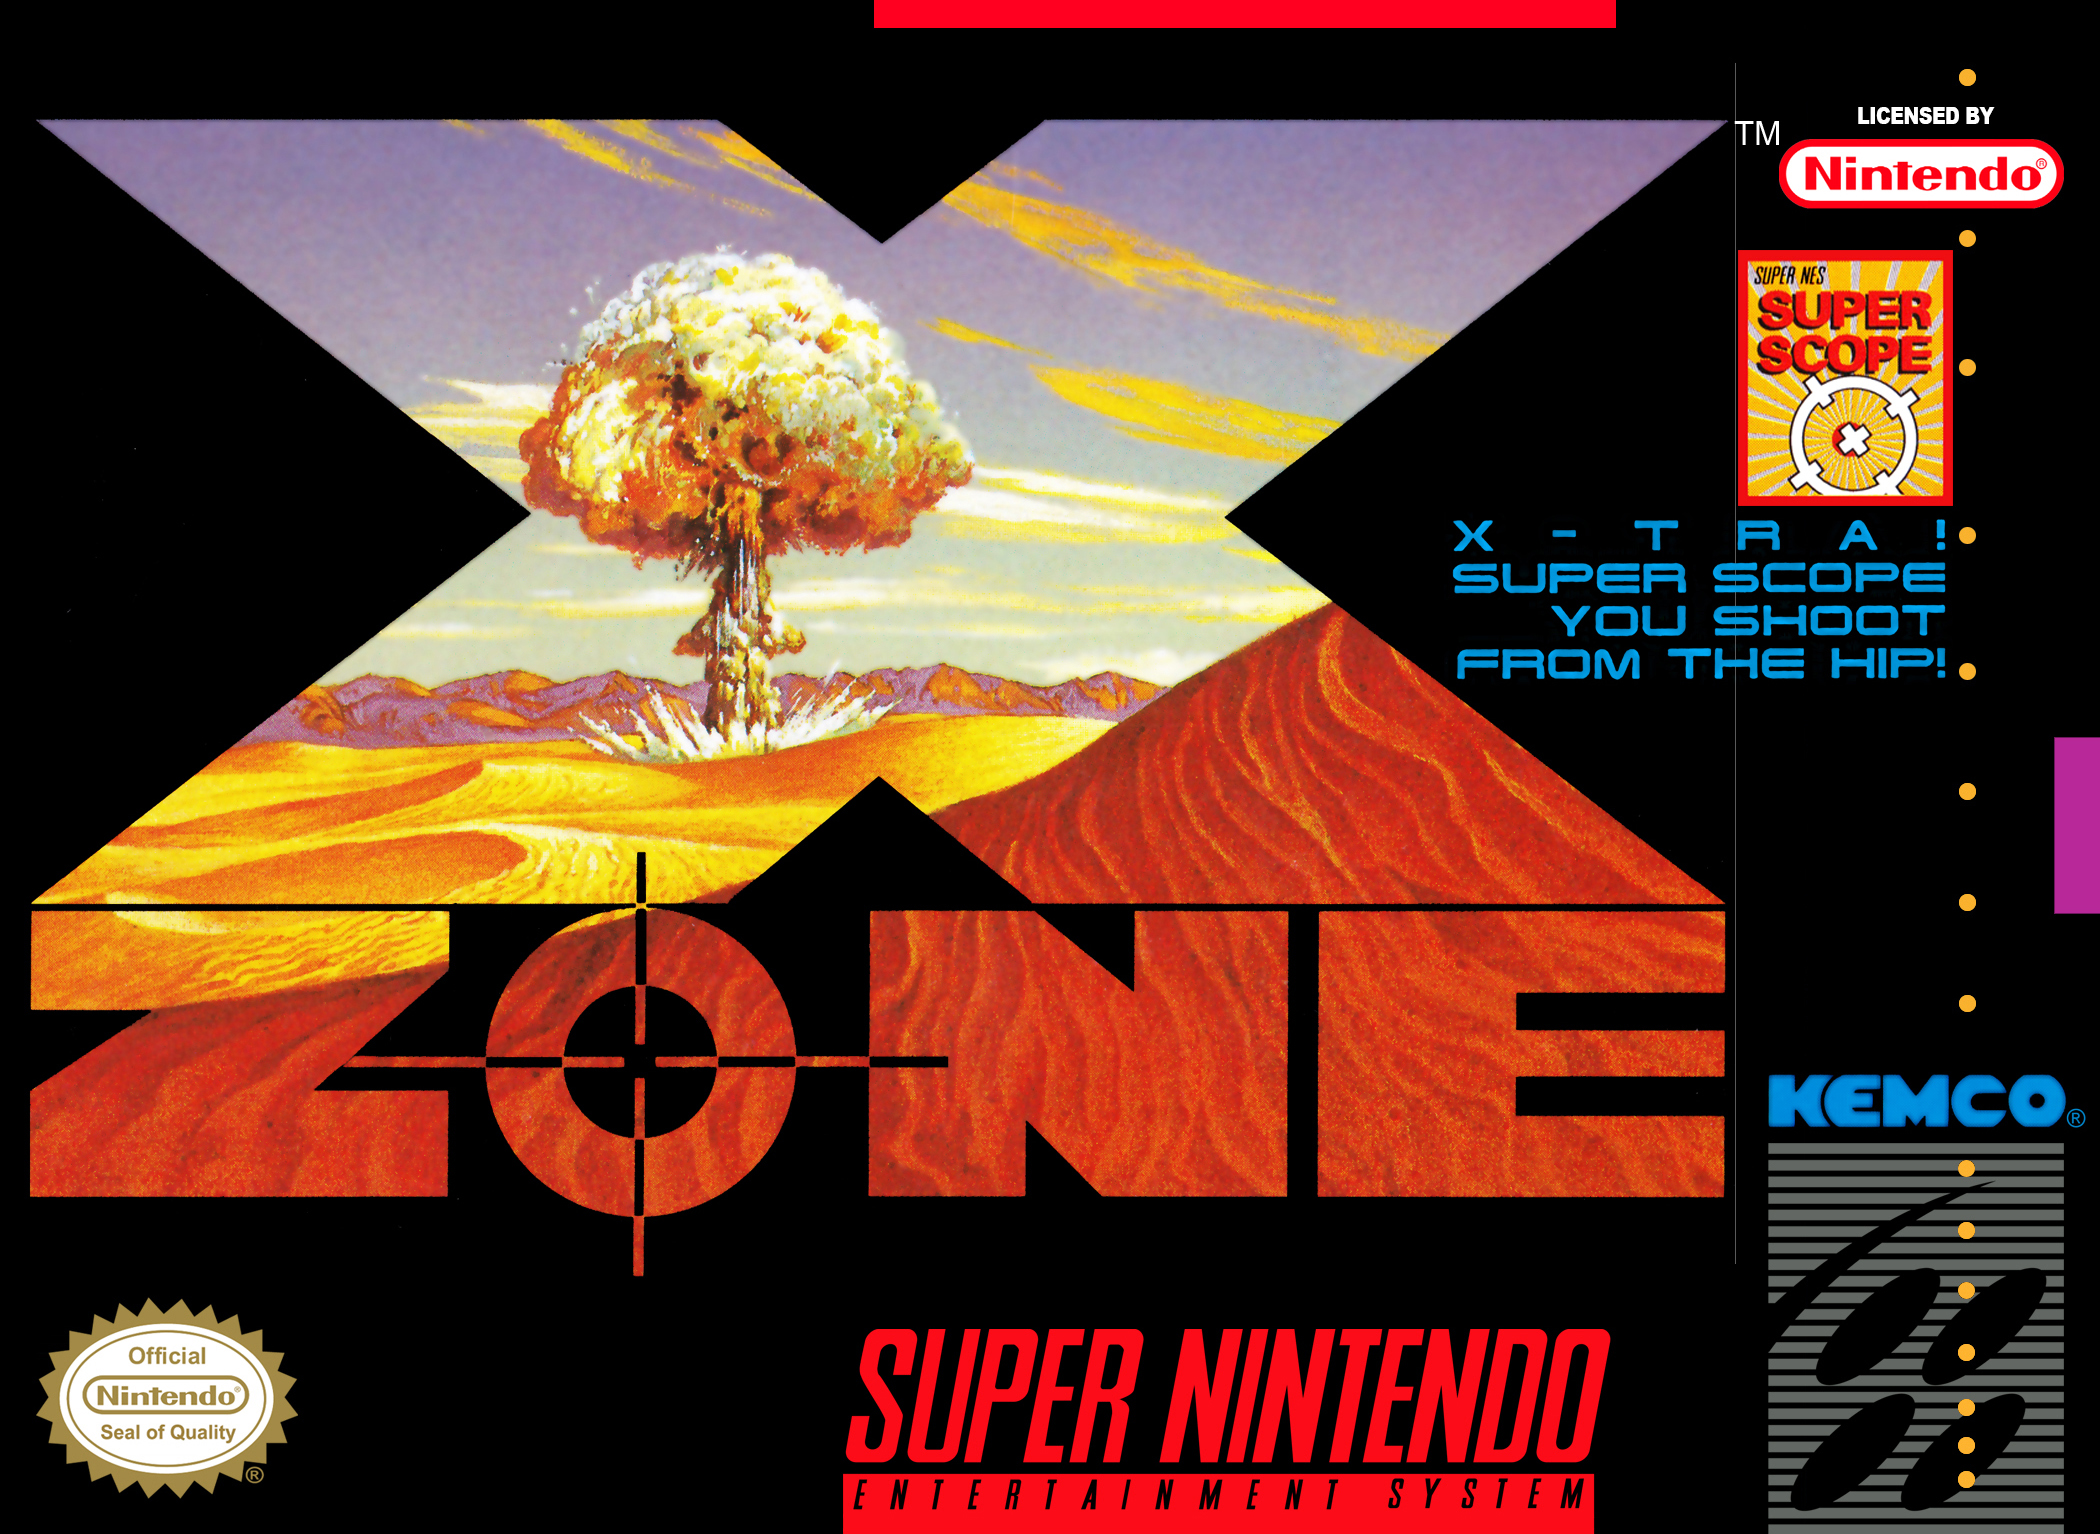 download x zone game for free